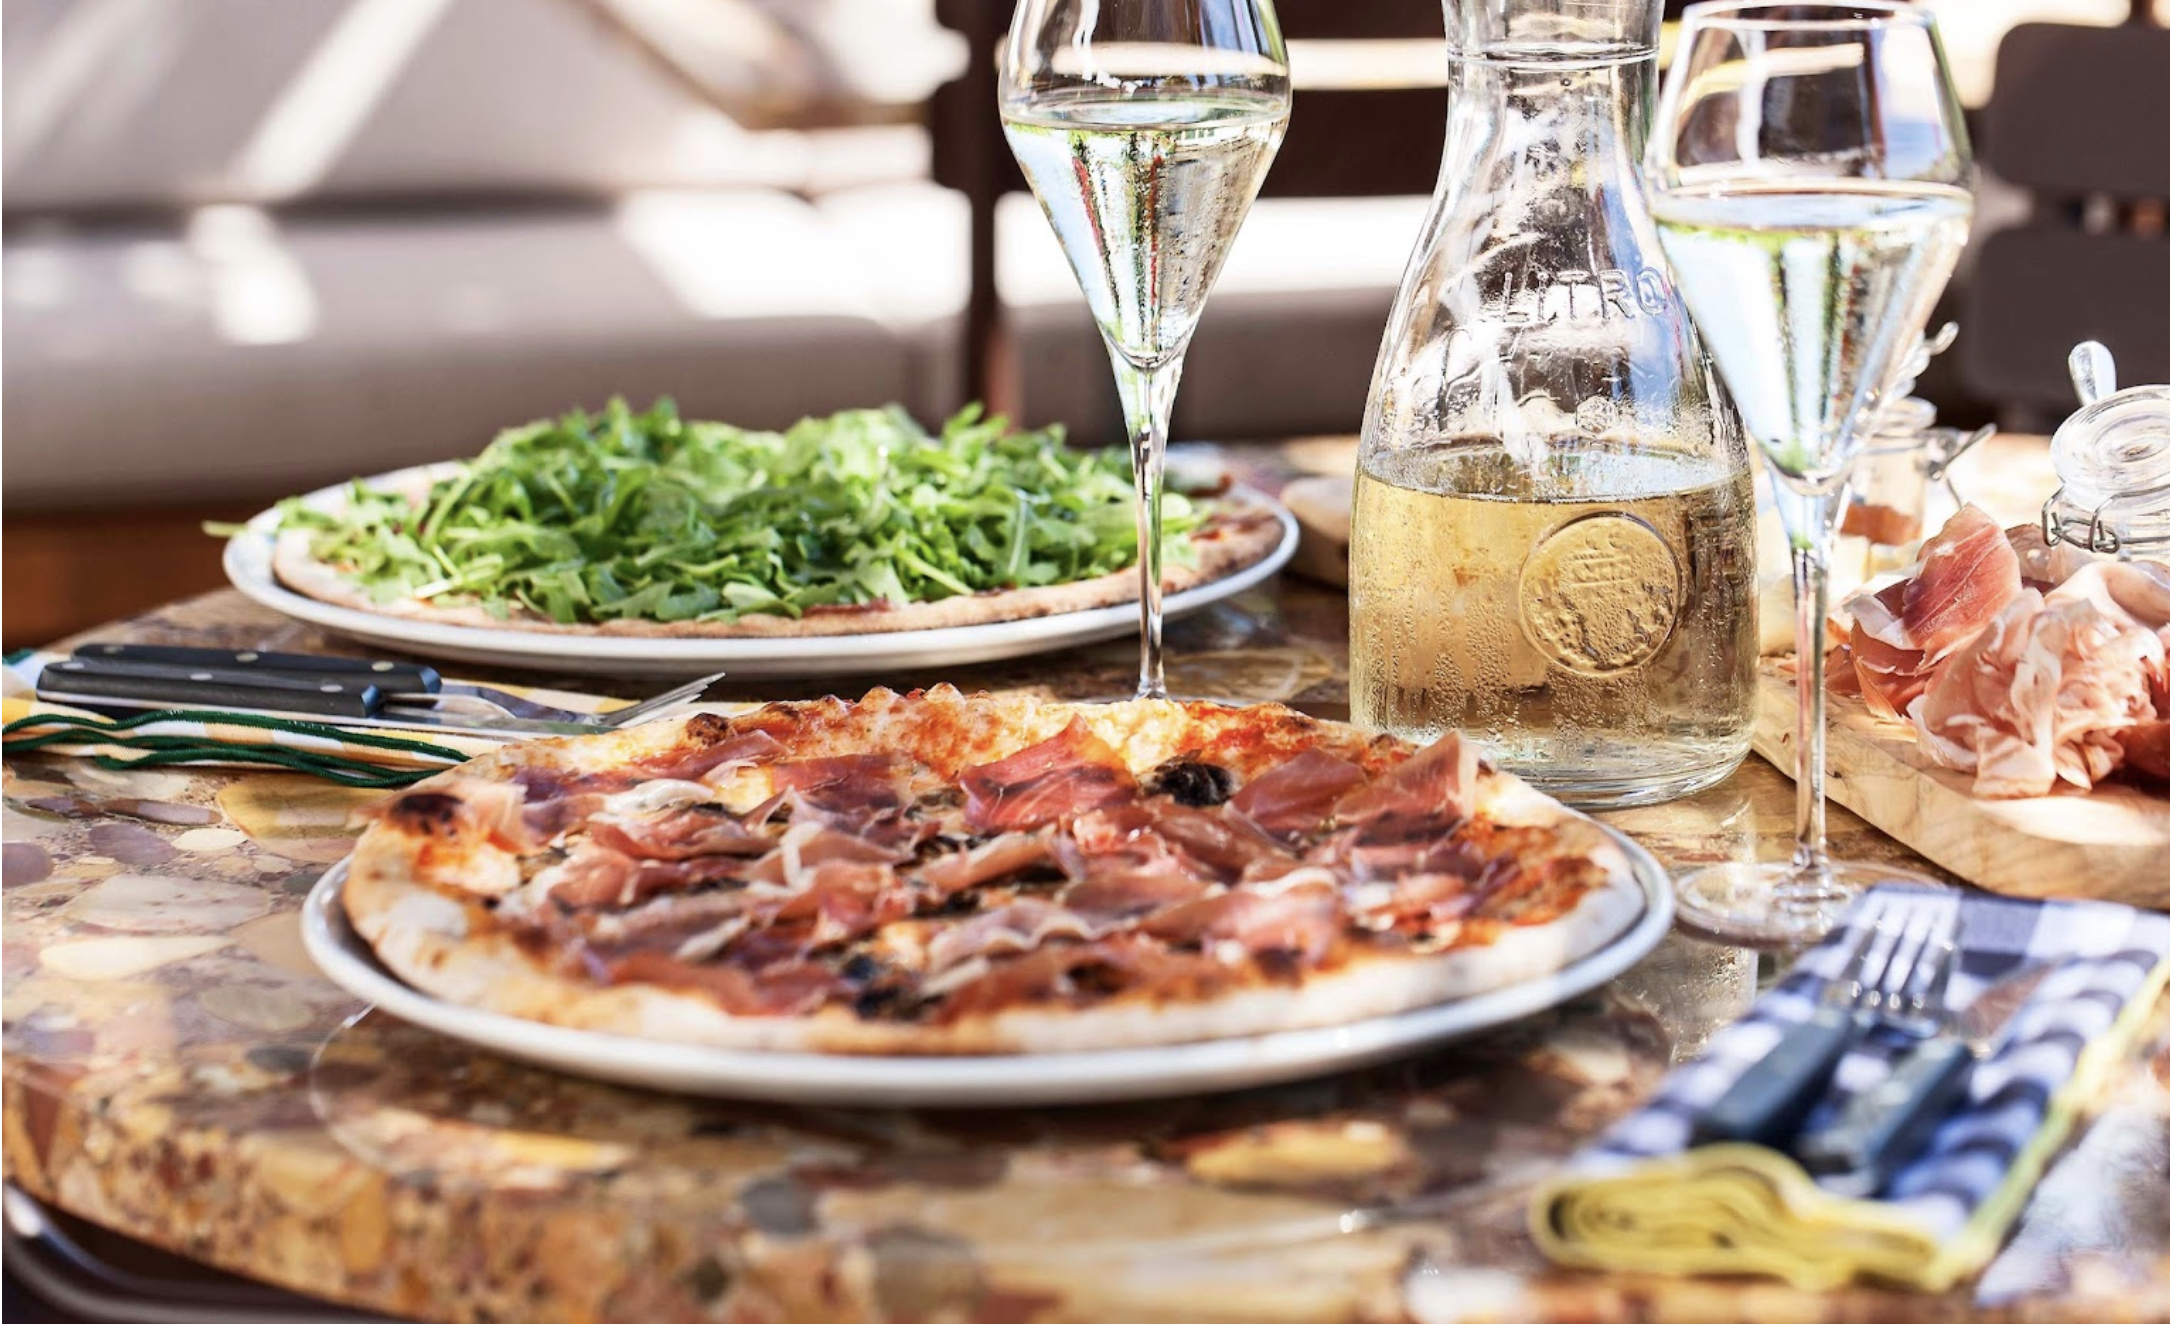 A pizza with olives and thinly sliced ham, a pizza piled high with rocket, two full wineglasses and a bottle of a water sit on a polished cork table.